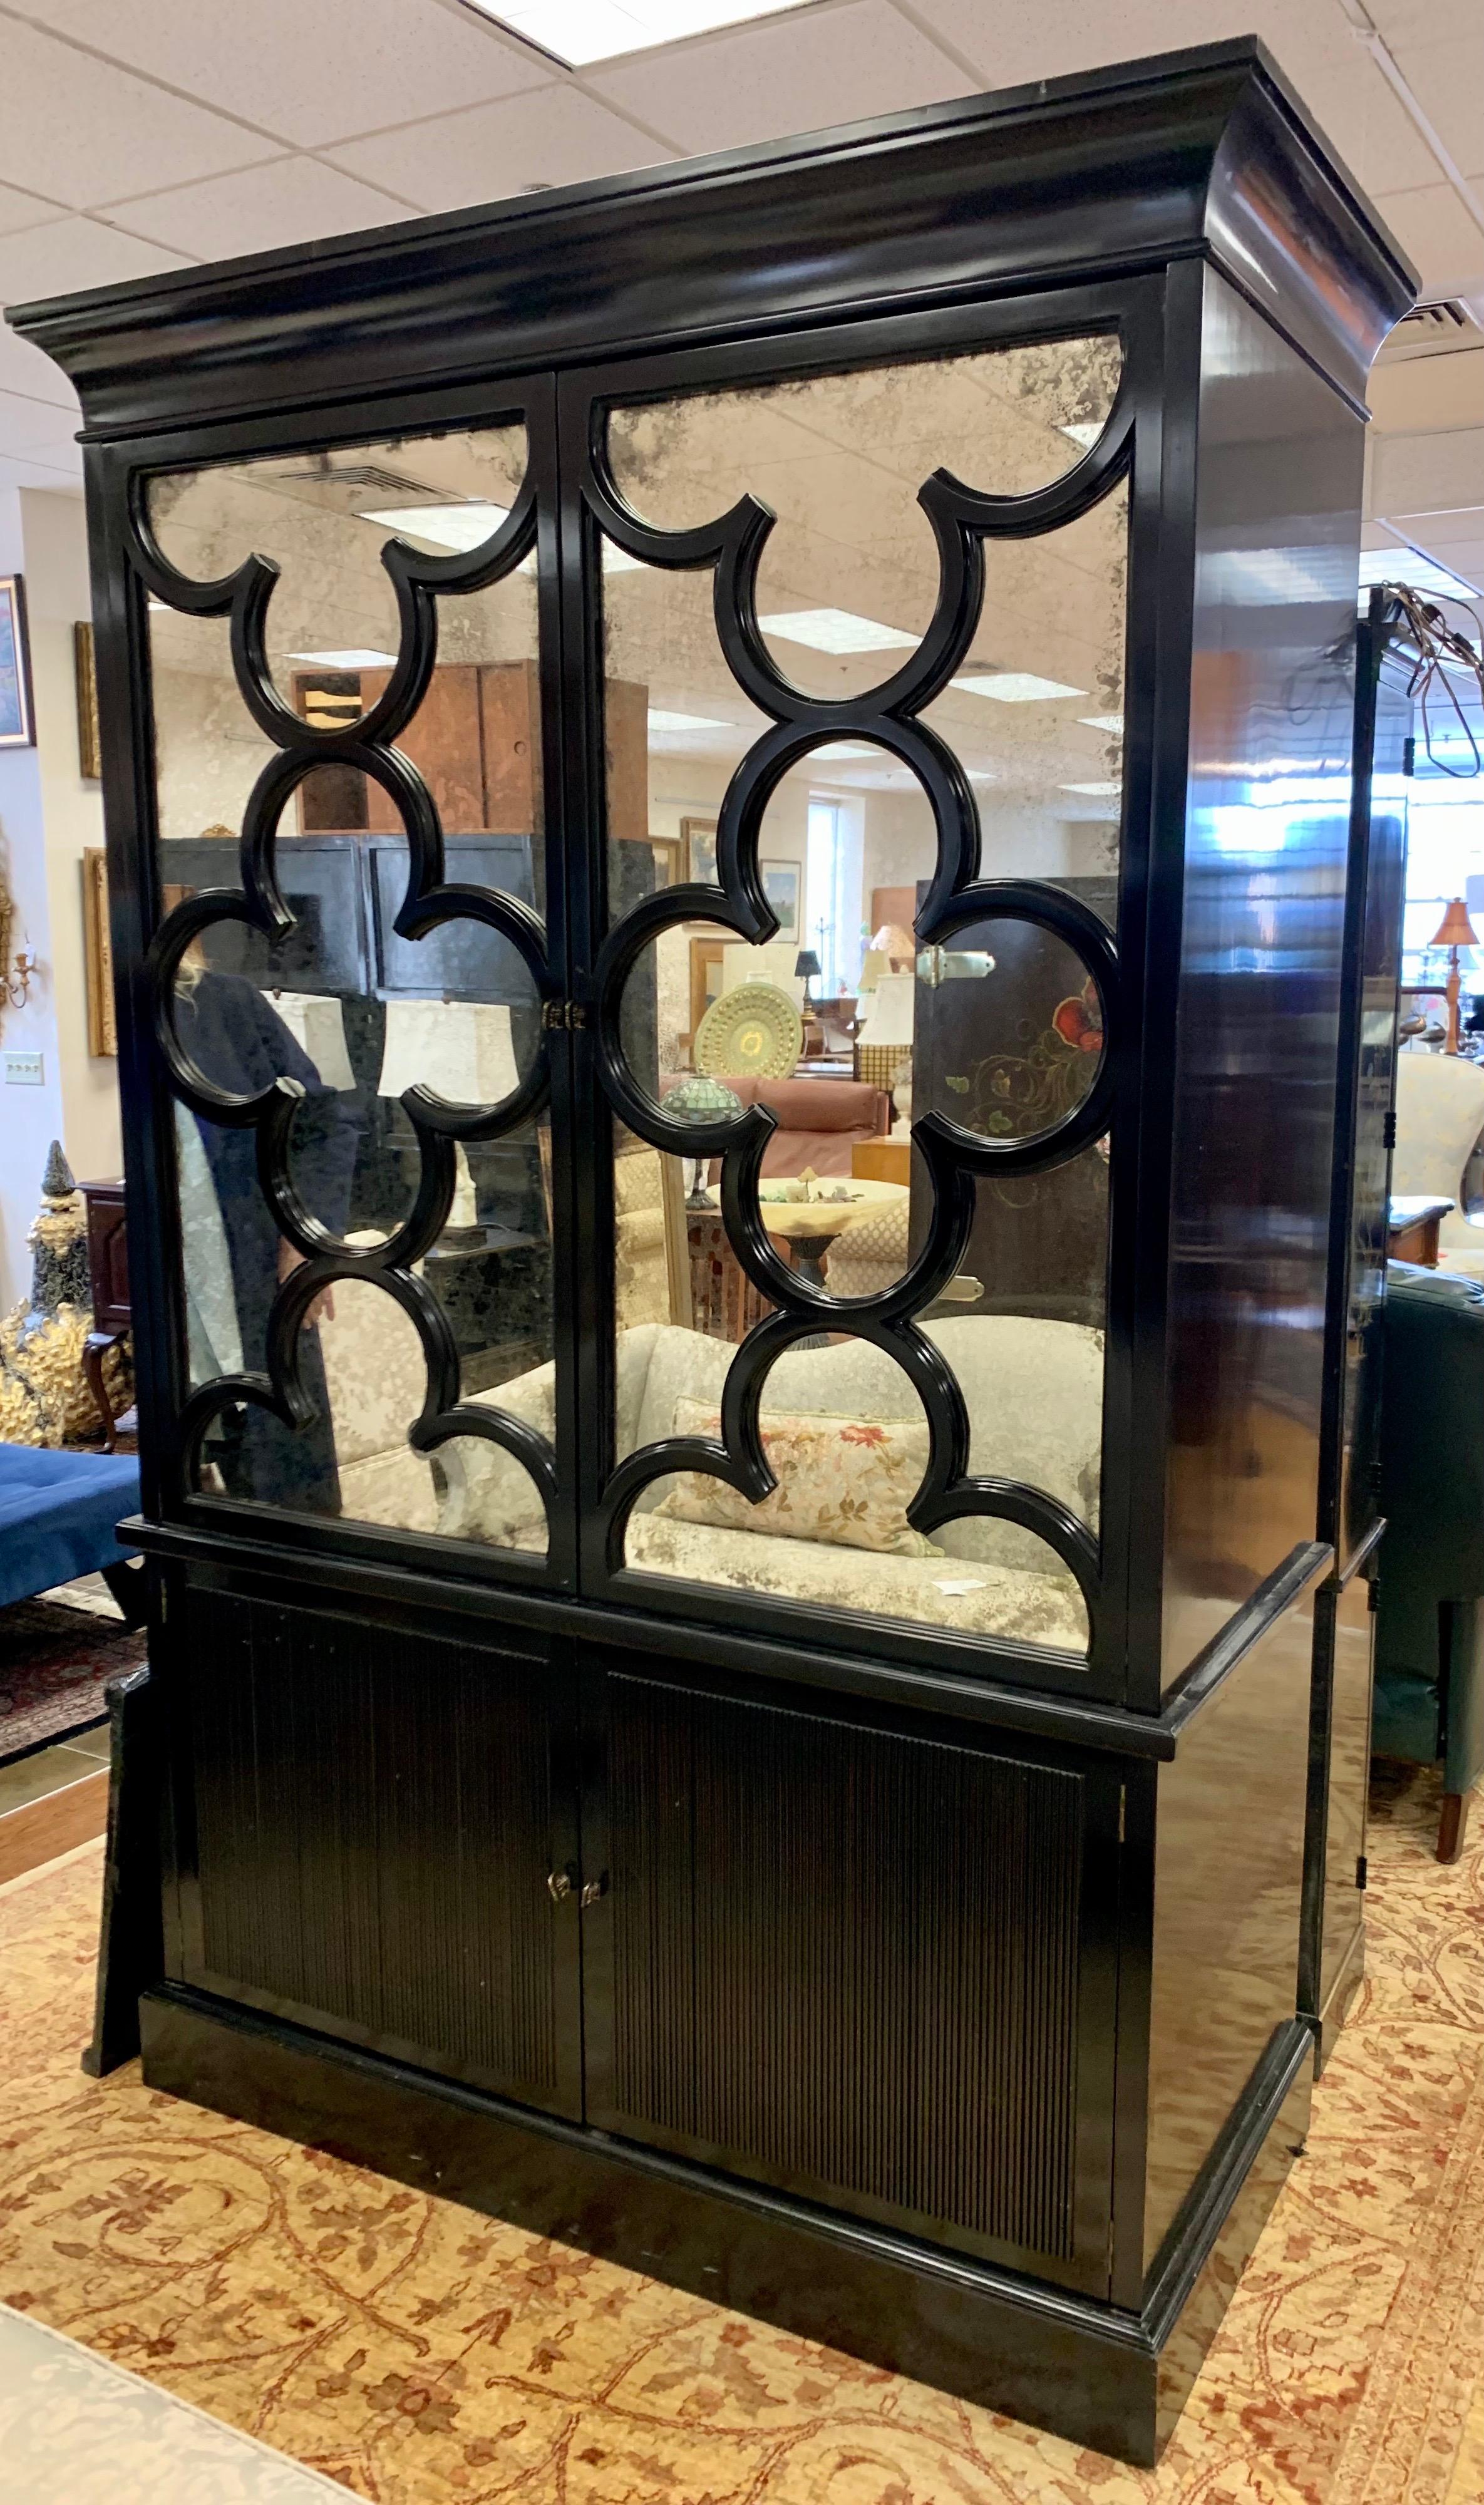 Stunning Barbara Barry for Baker Furniture 2 pc. black lacquer china cabinet with quatrefoil fretwork over mirrored doors. Mirrors have an antique finish. A great statement piece with plenty of storage for a tv or wardrobe! Retailed new a few years